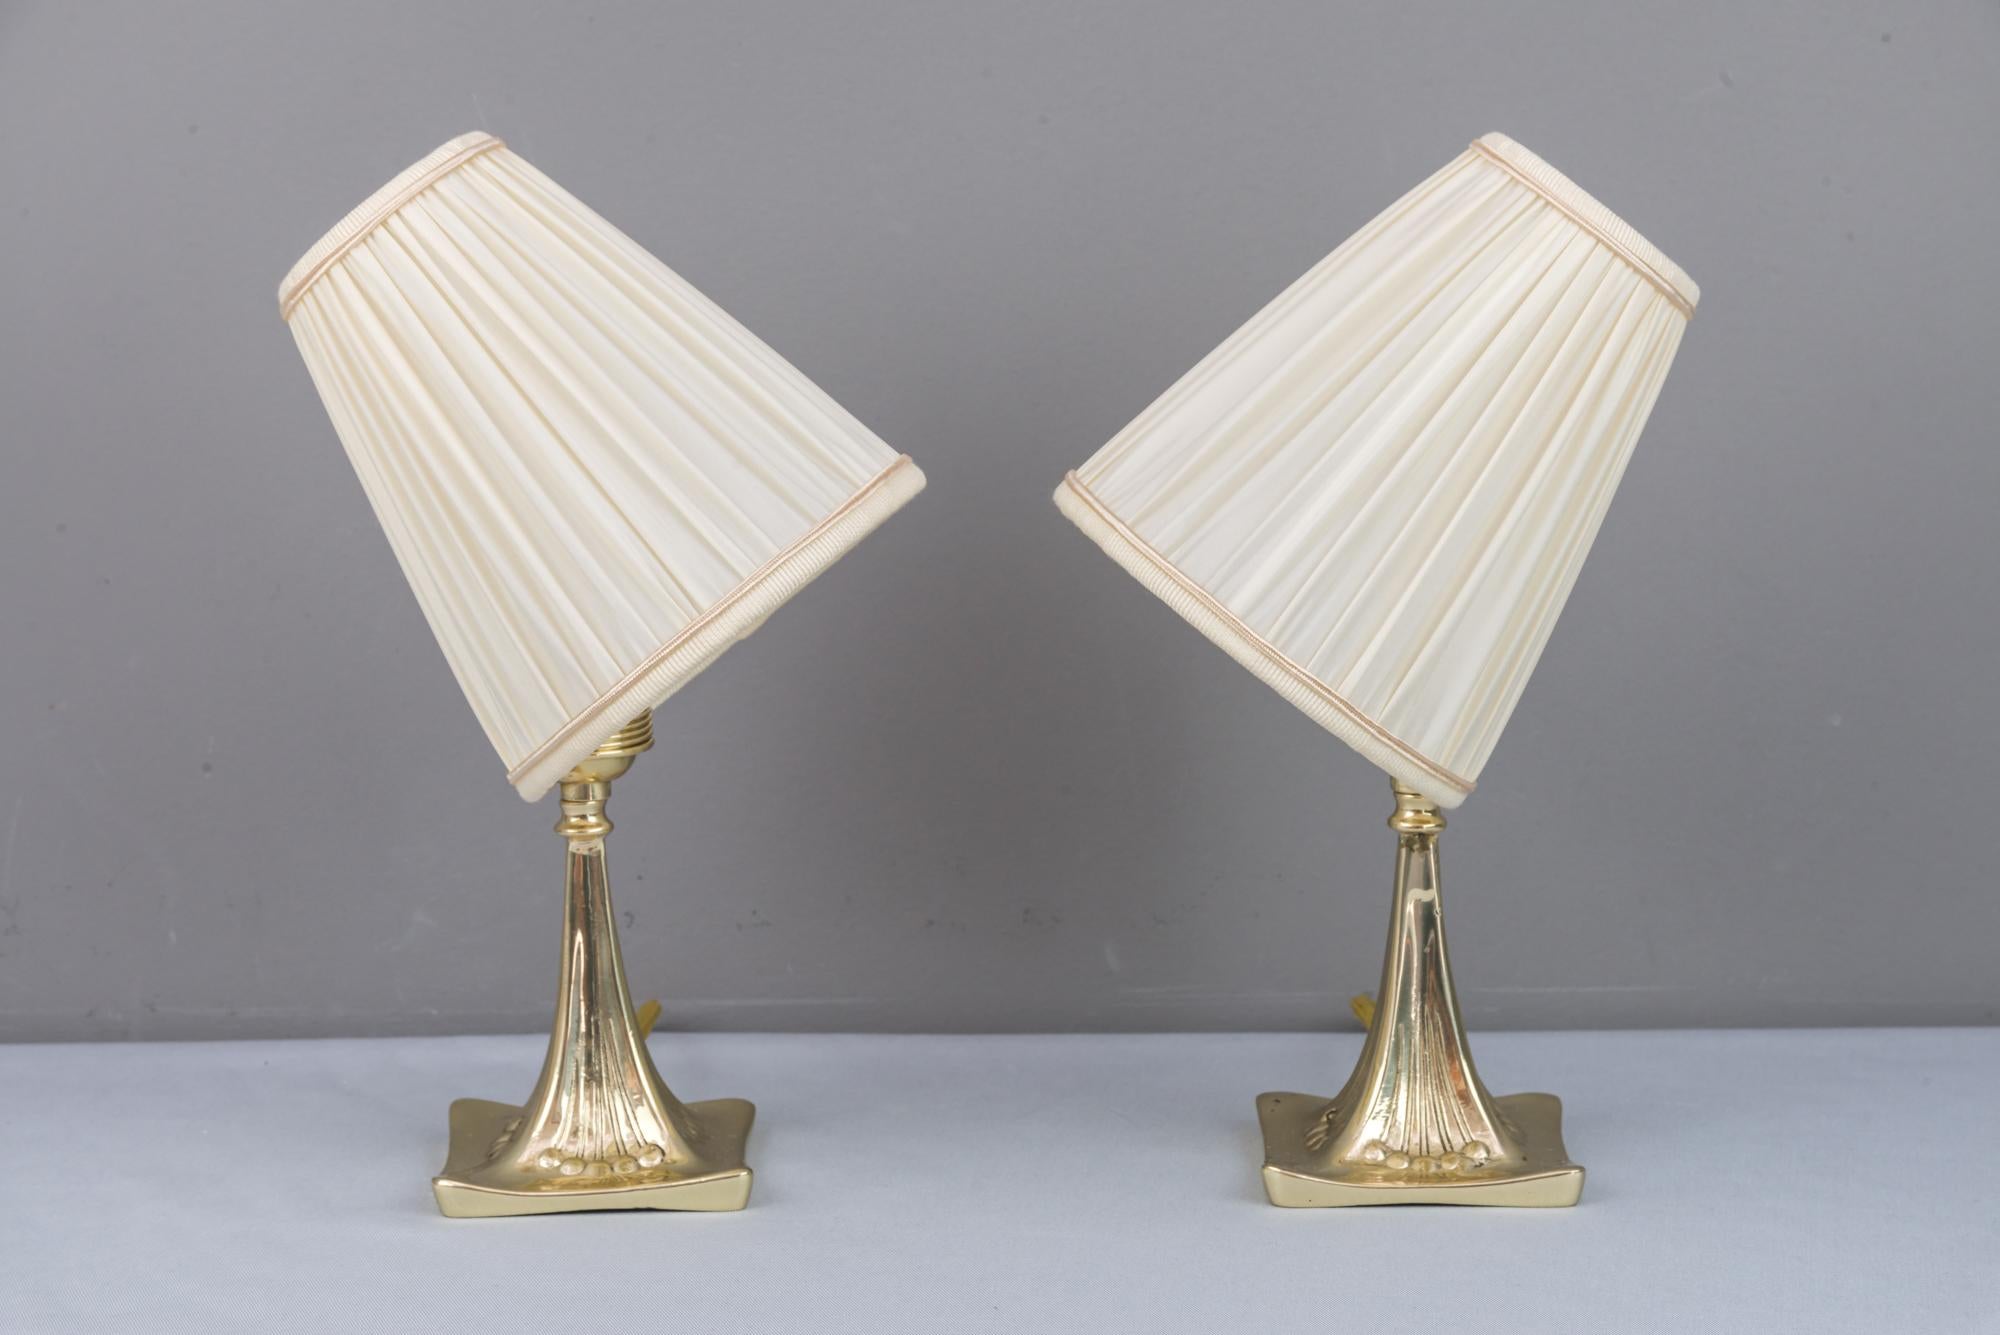 Two jugendstil table lamps, circa 1908
Brass polished and stove enamelled
The fabric is replaced (New)
The price is for both.